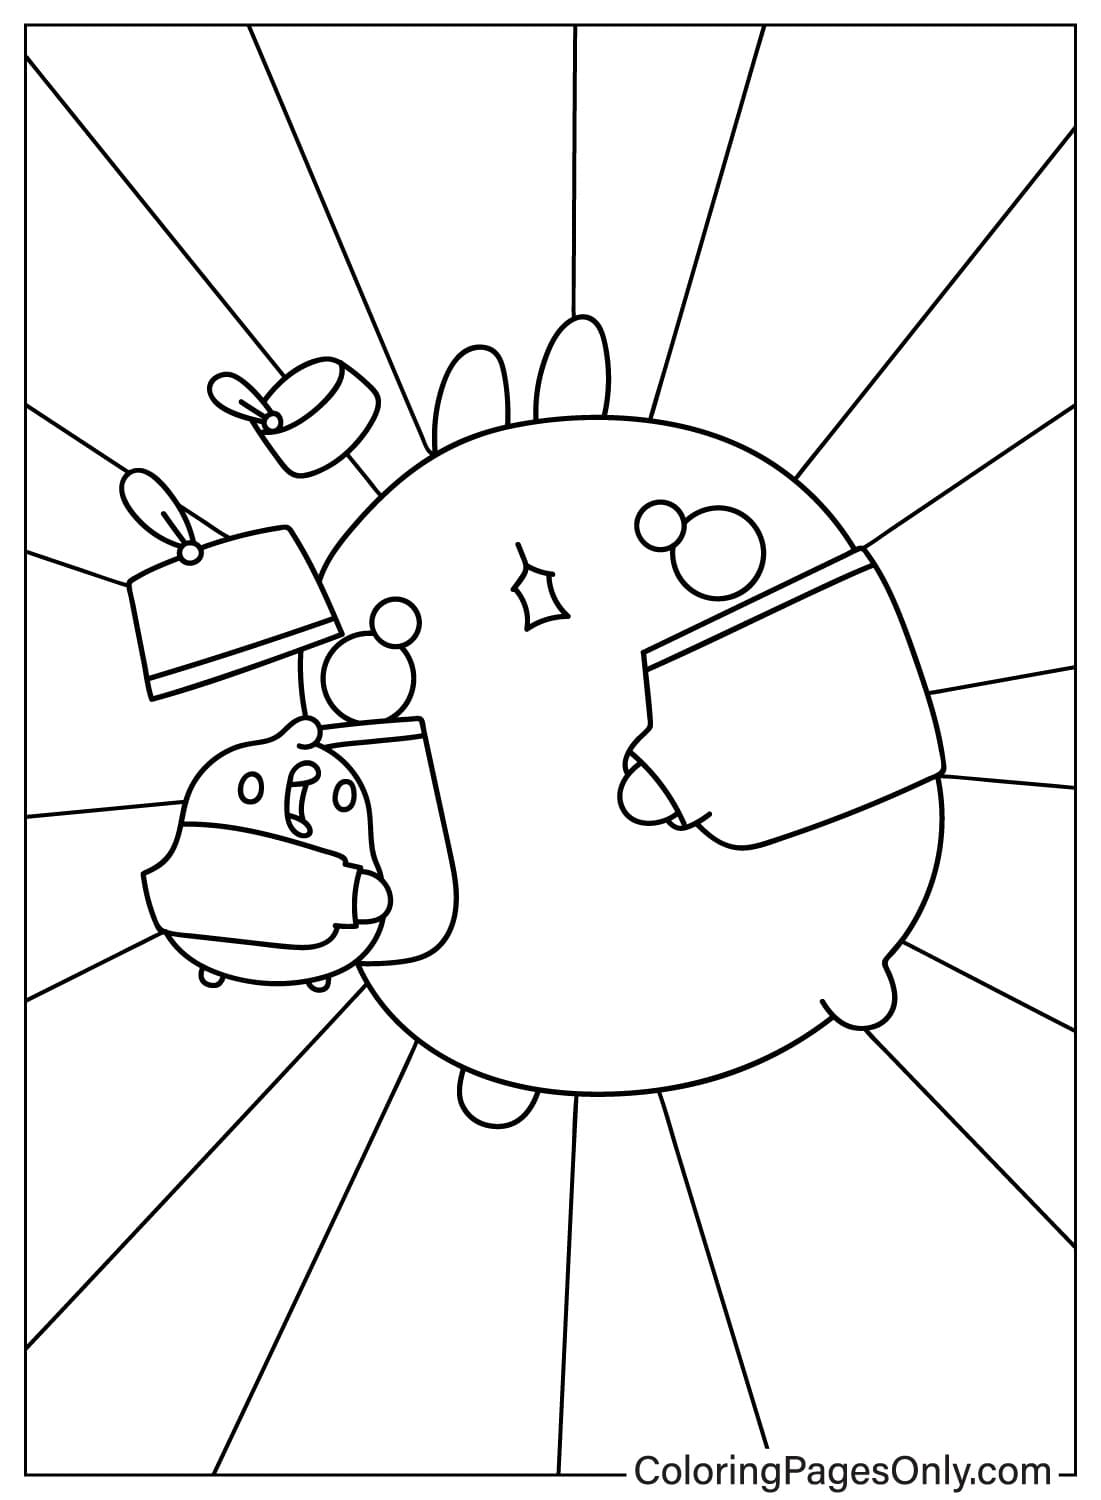 Molang and Piu Piu Scared Coloring Page from Molang